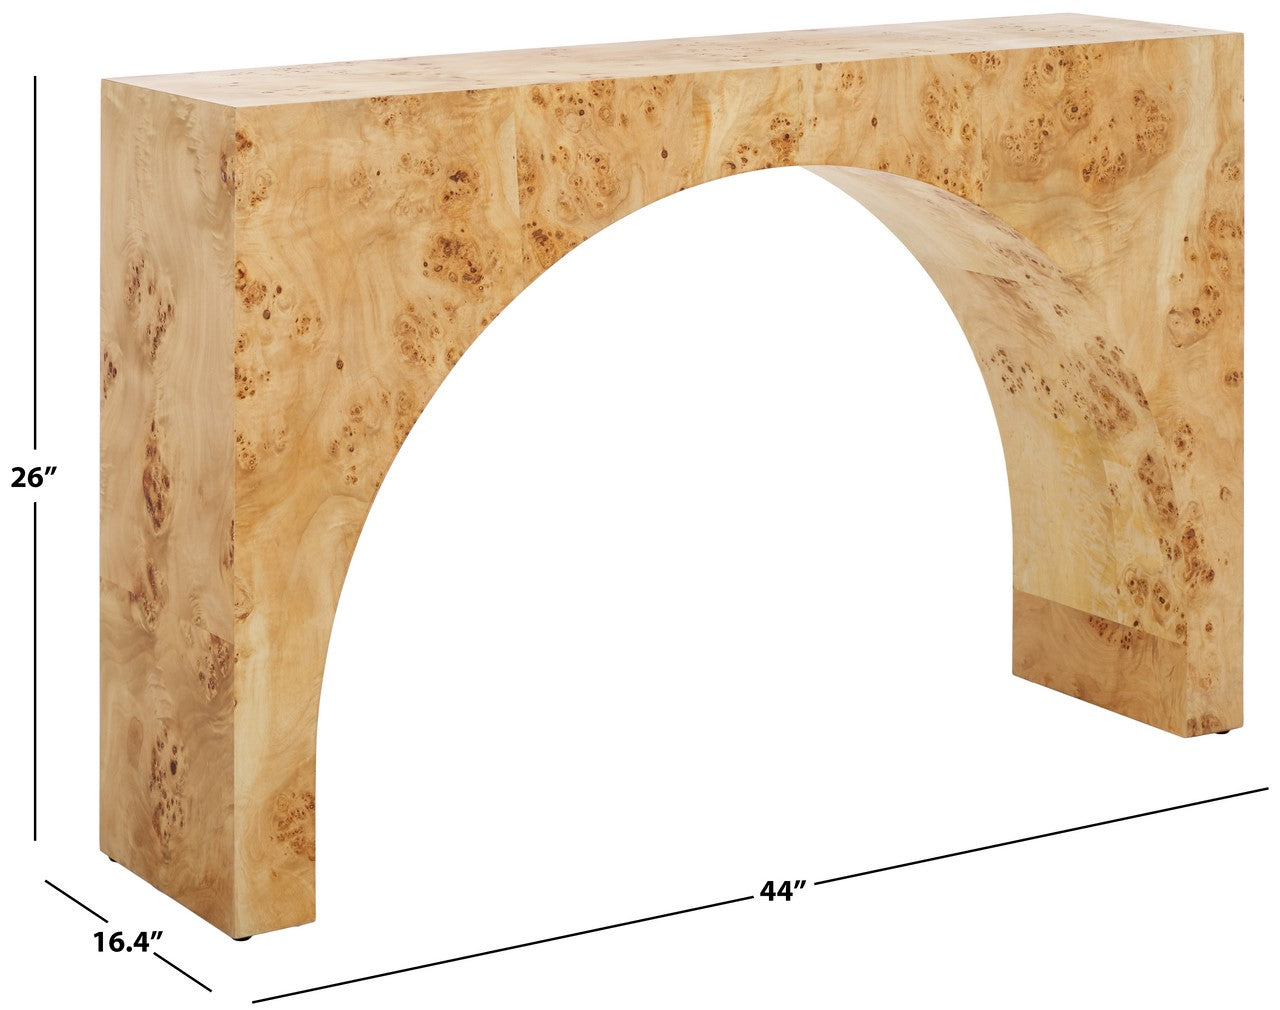 Safavieh Couture Katelynn Burled Mappa Console Table, SFV3590 - Natural